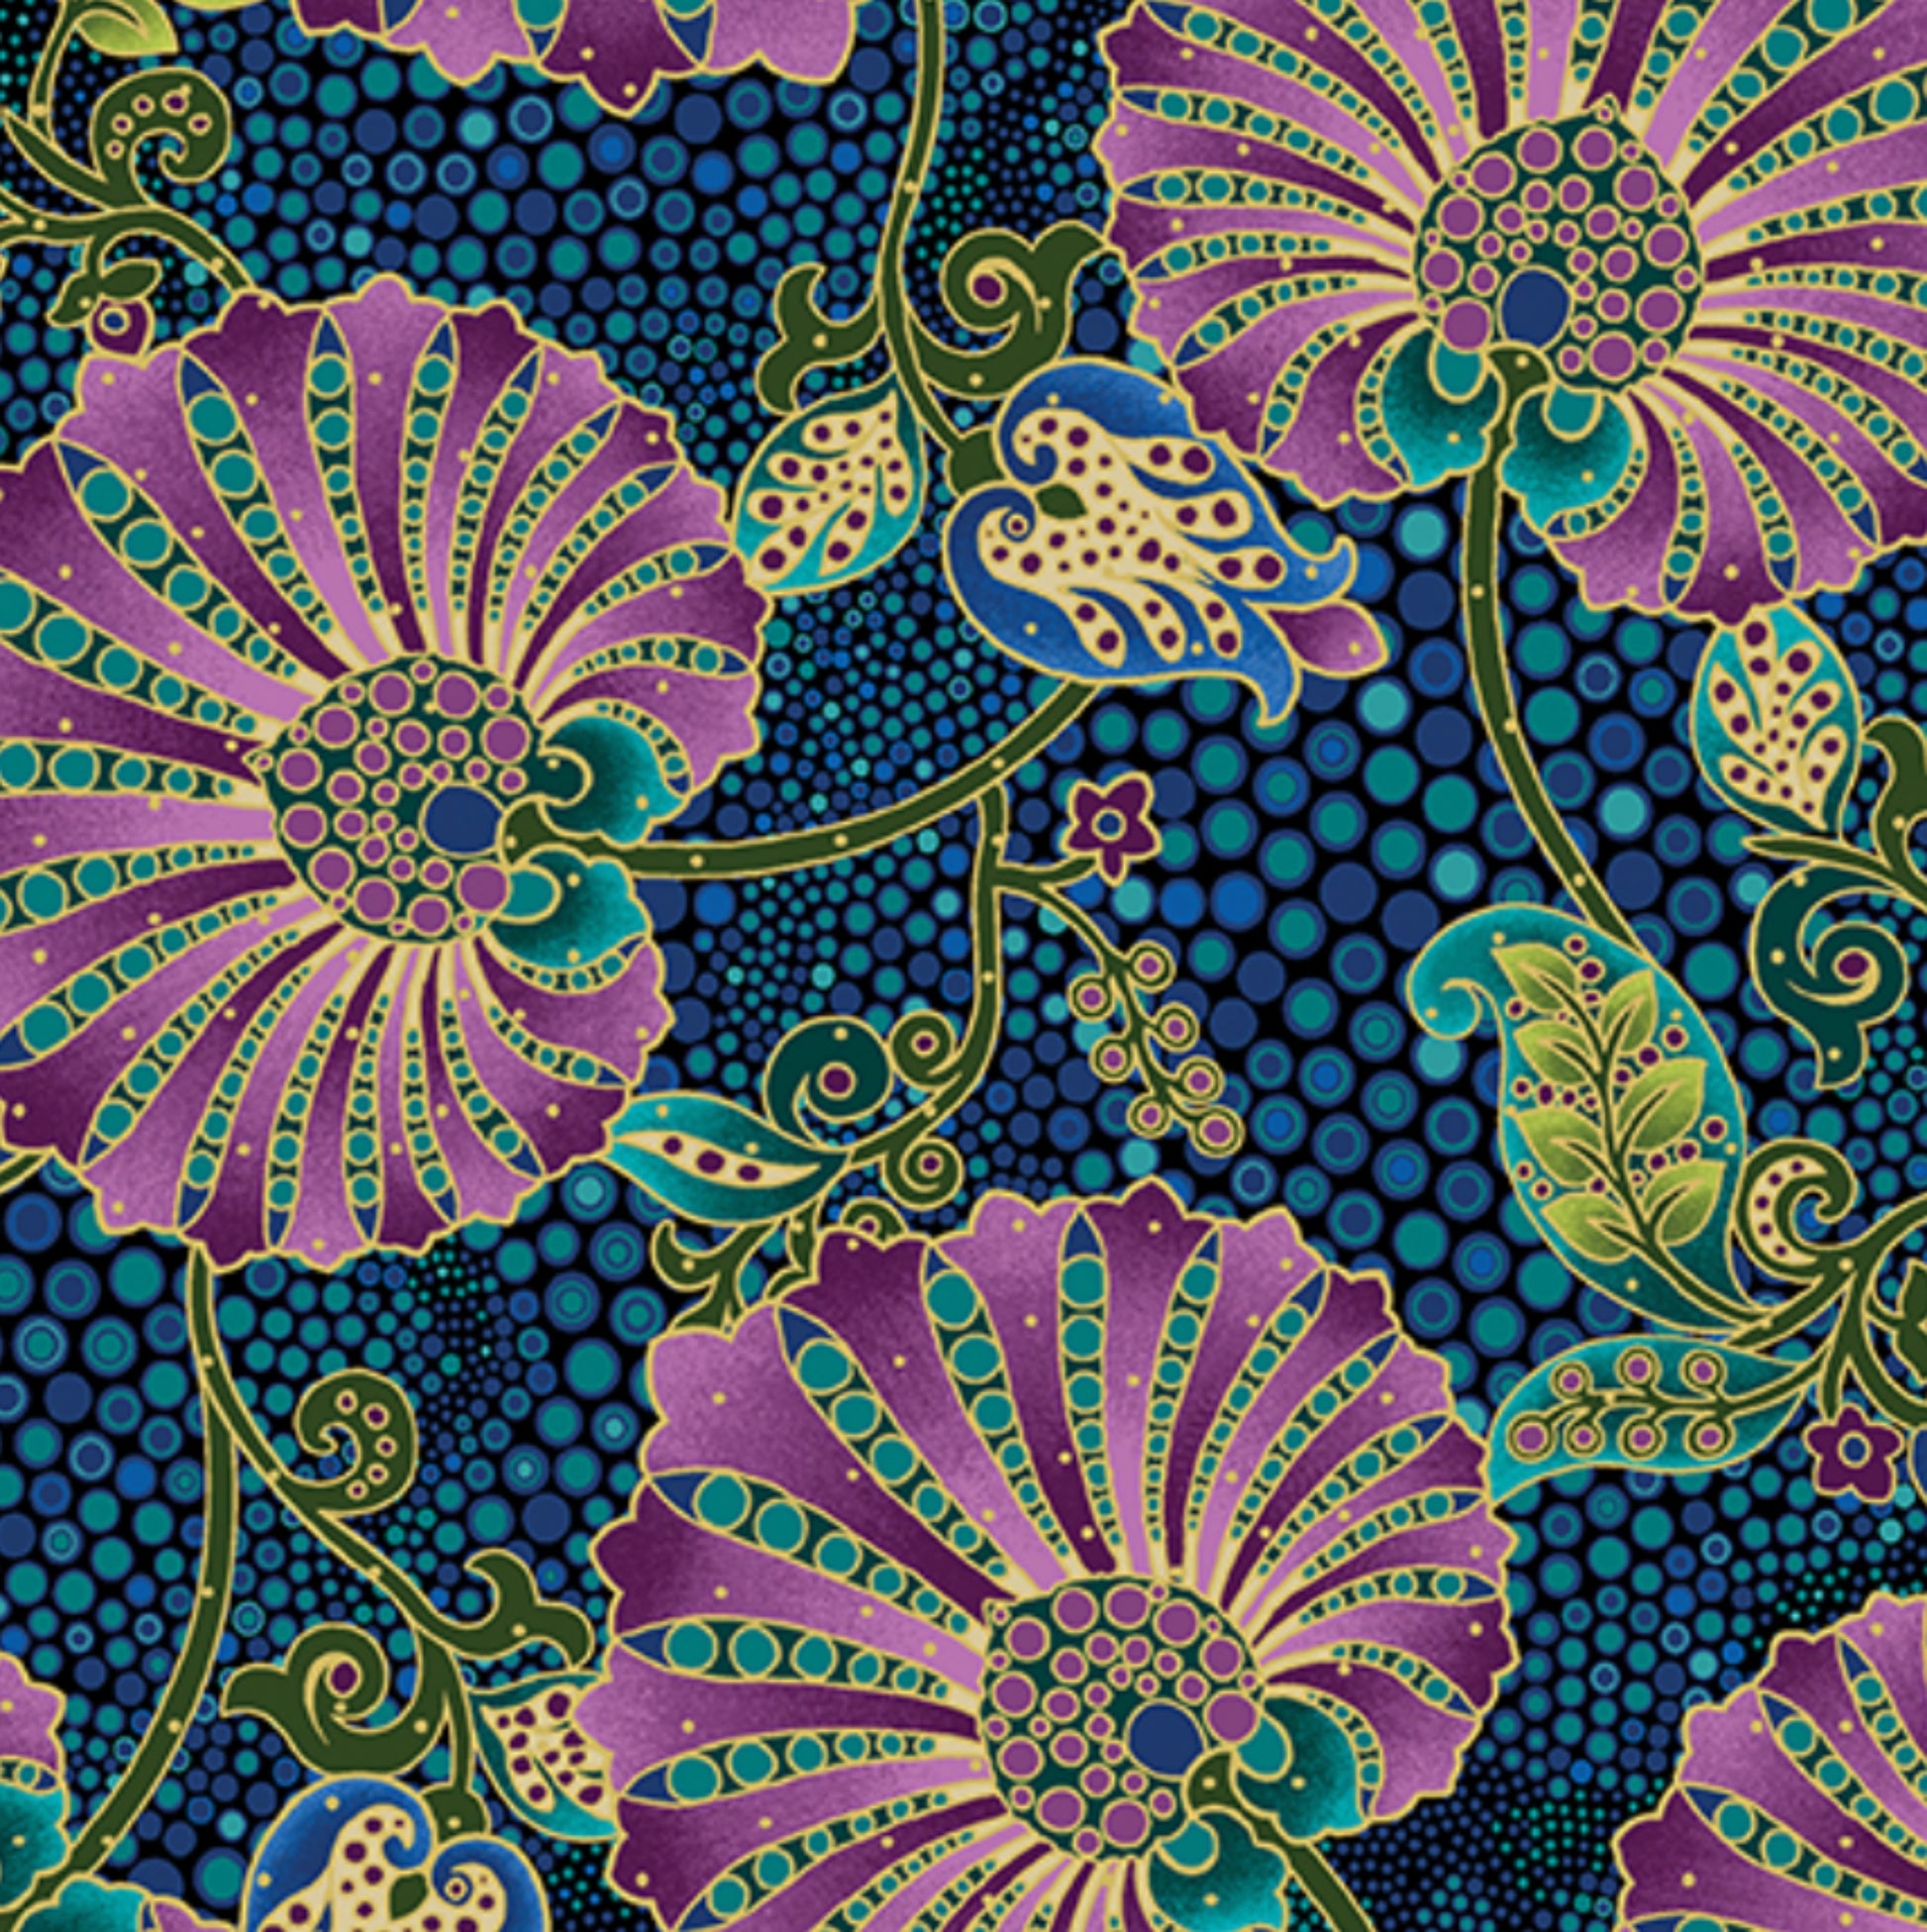 Fanflower Fabric from the Shangri La Collection by Painted Sky Studios for Benartex. Teal and gold mettalic accents.